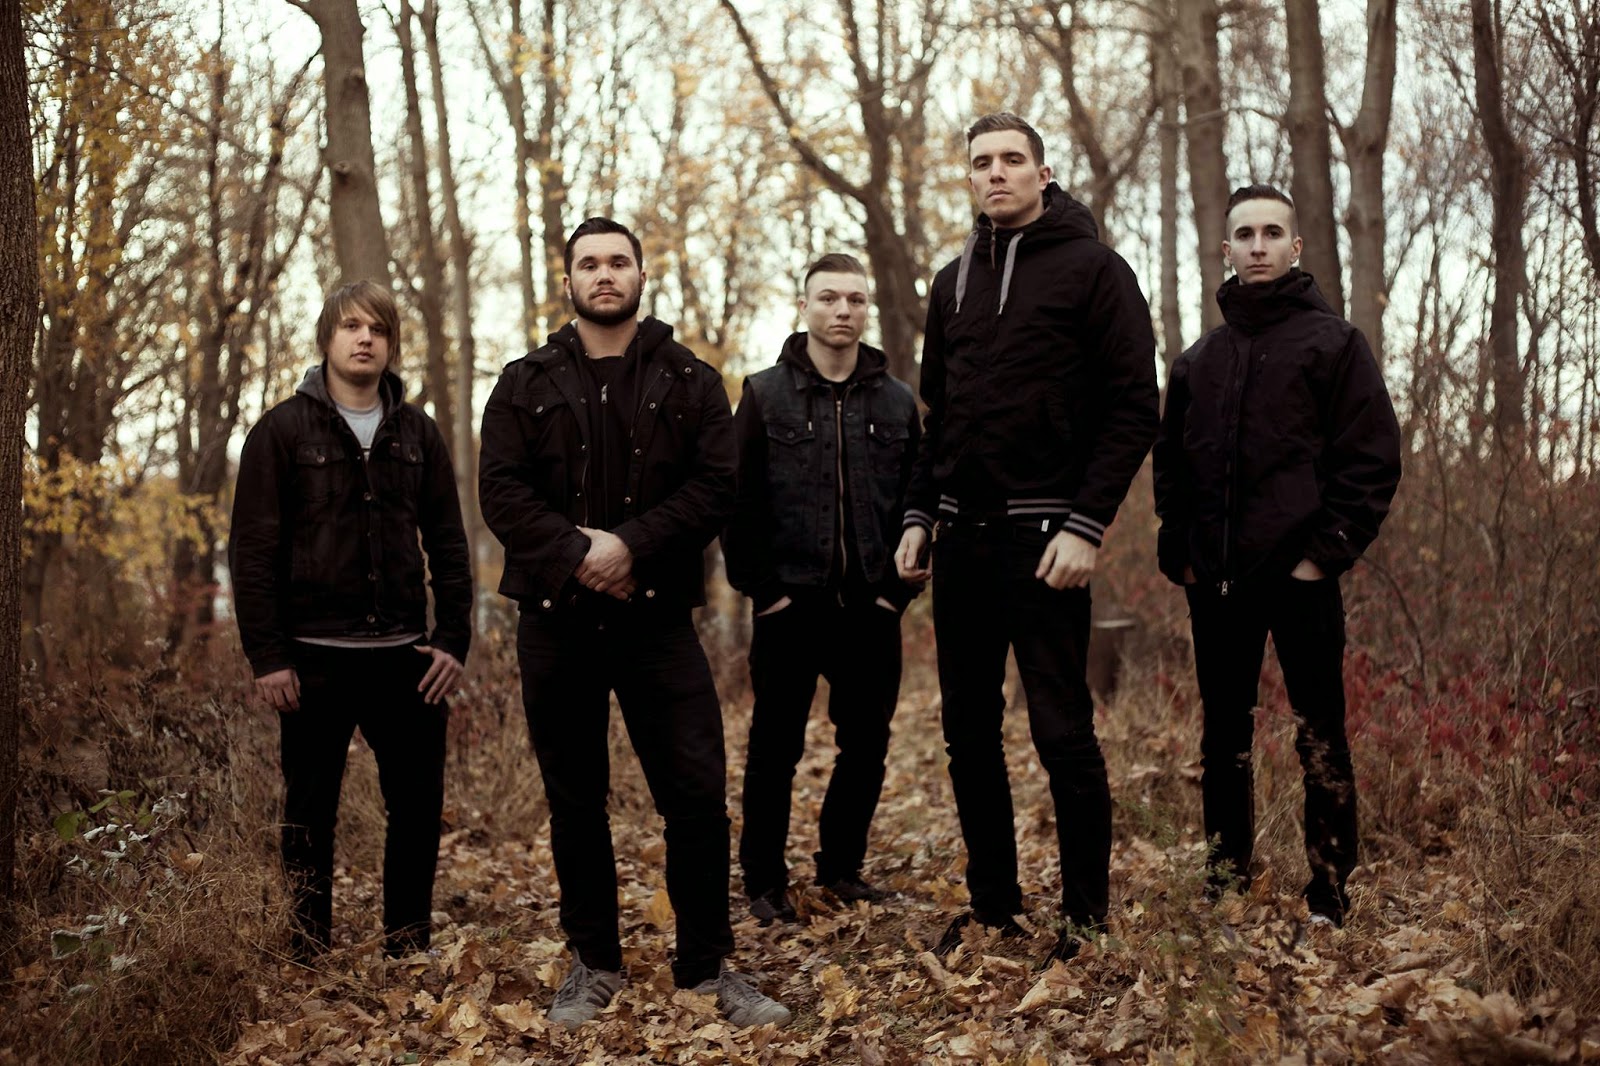 Sirens & Sailors Releases Video for "The Chosen One"